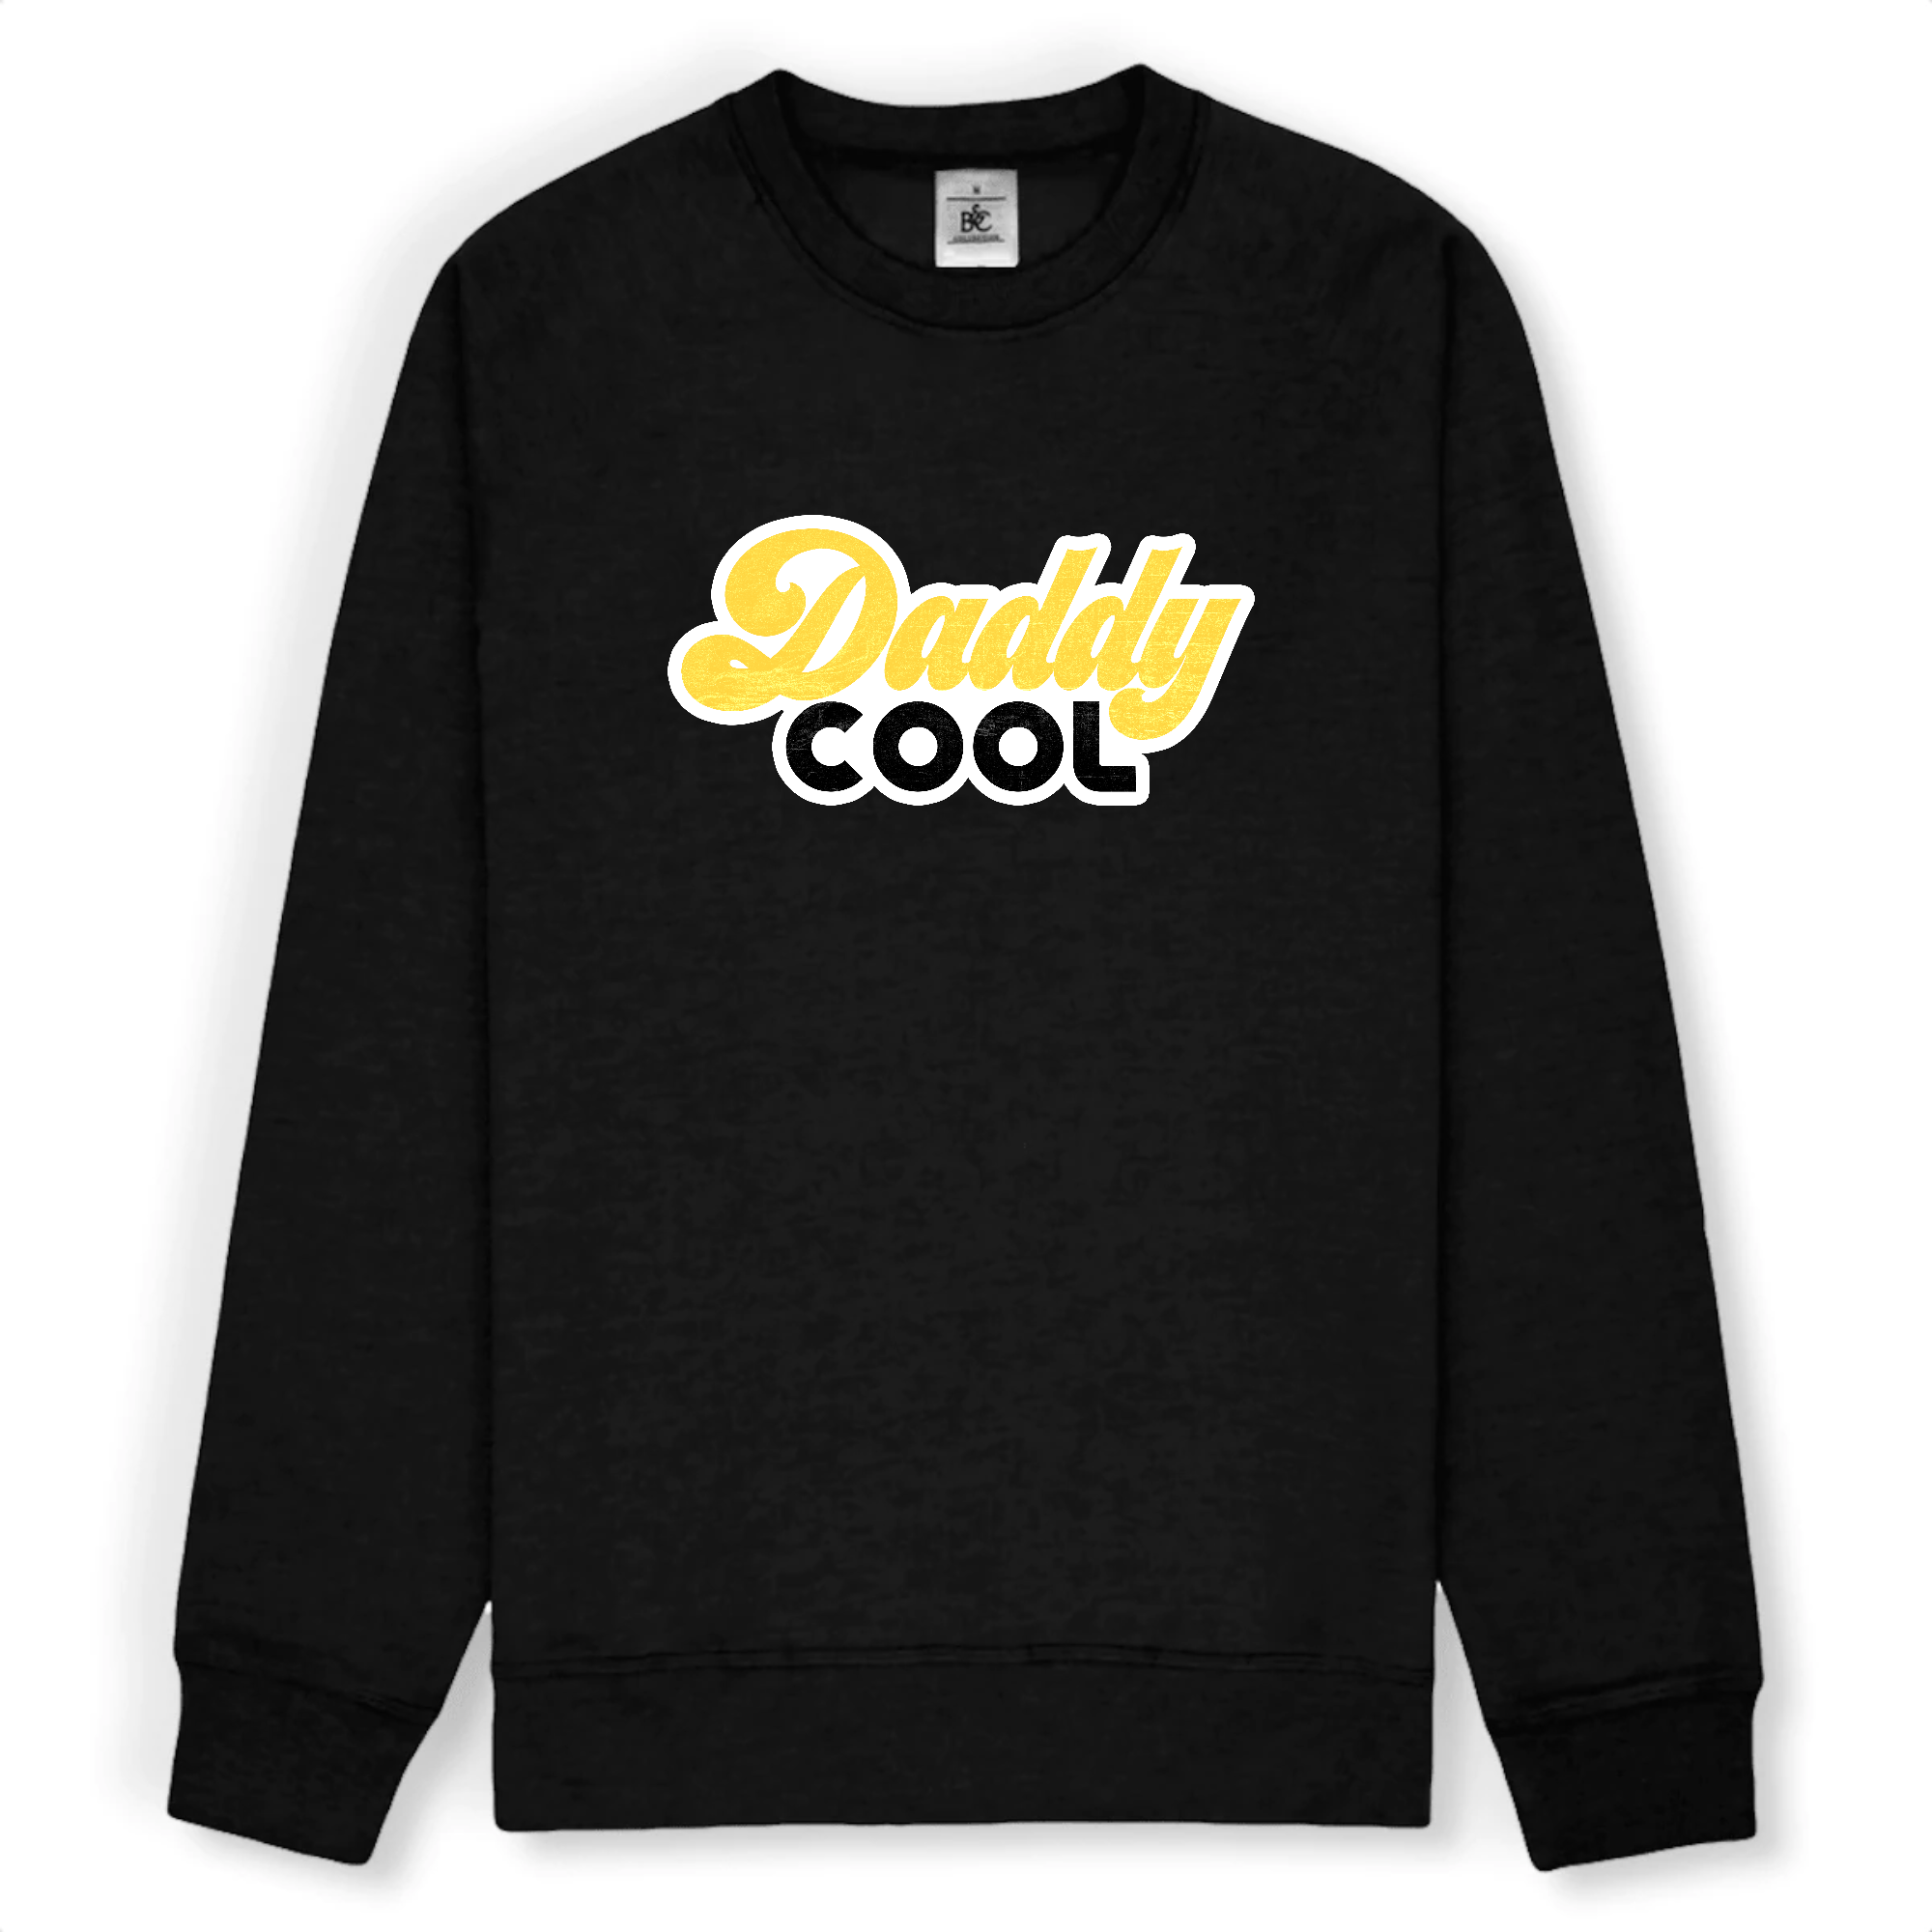 Pull - "DADDY COOL"